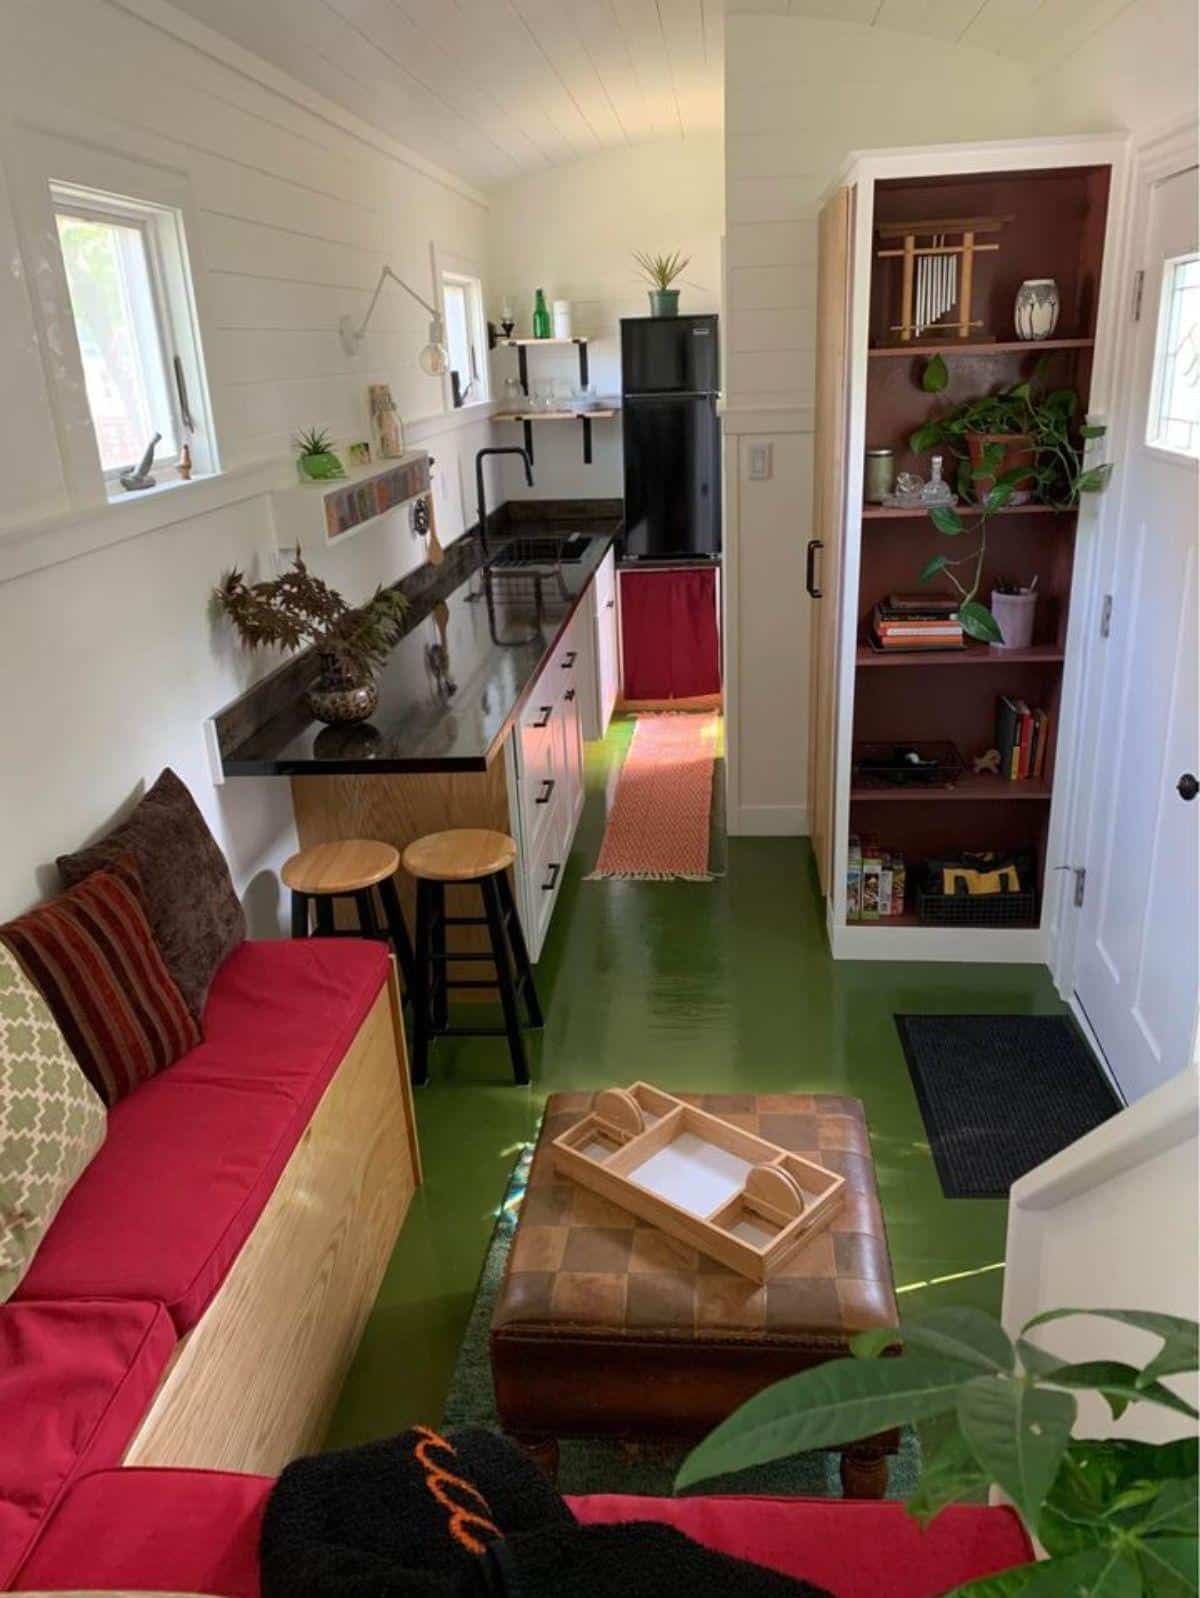 internal view of brand new 29’ tiny house